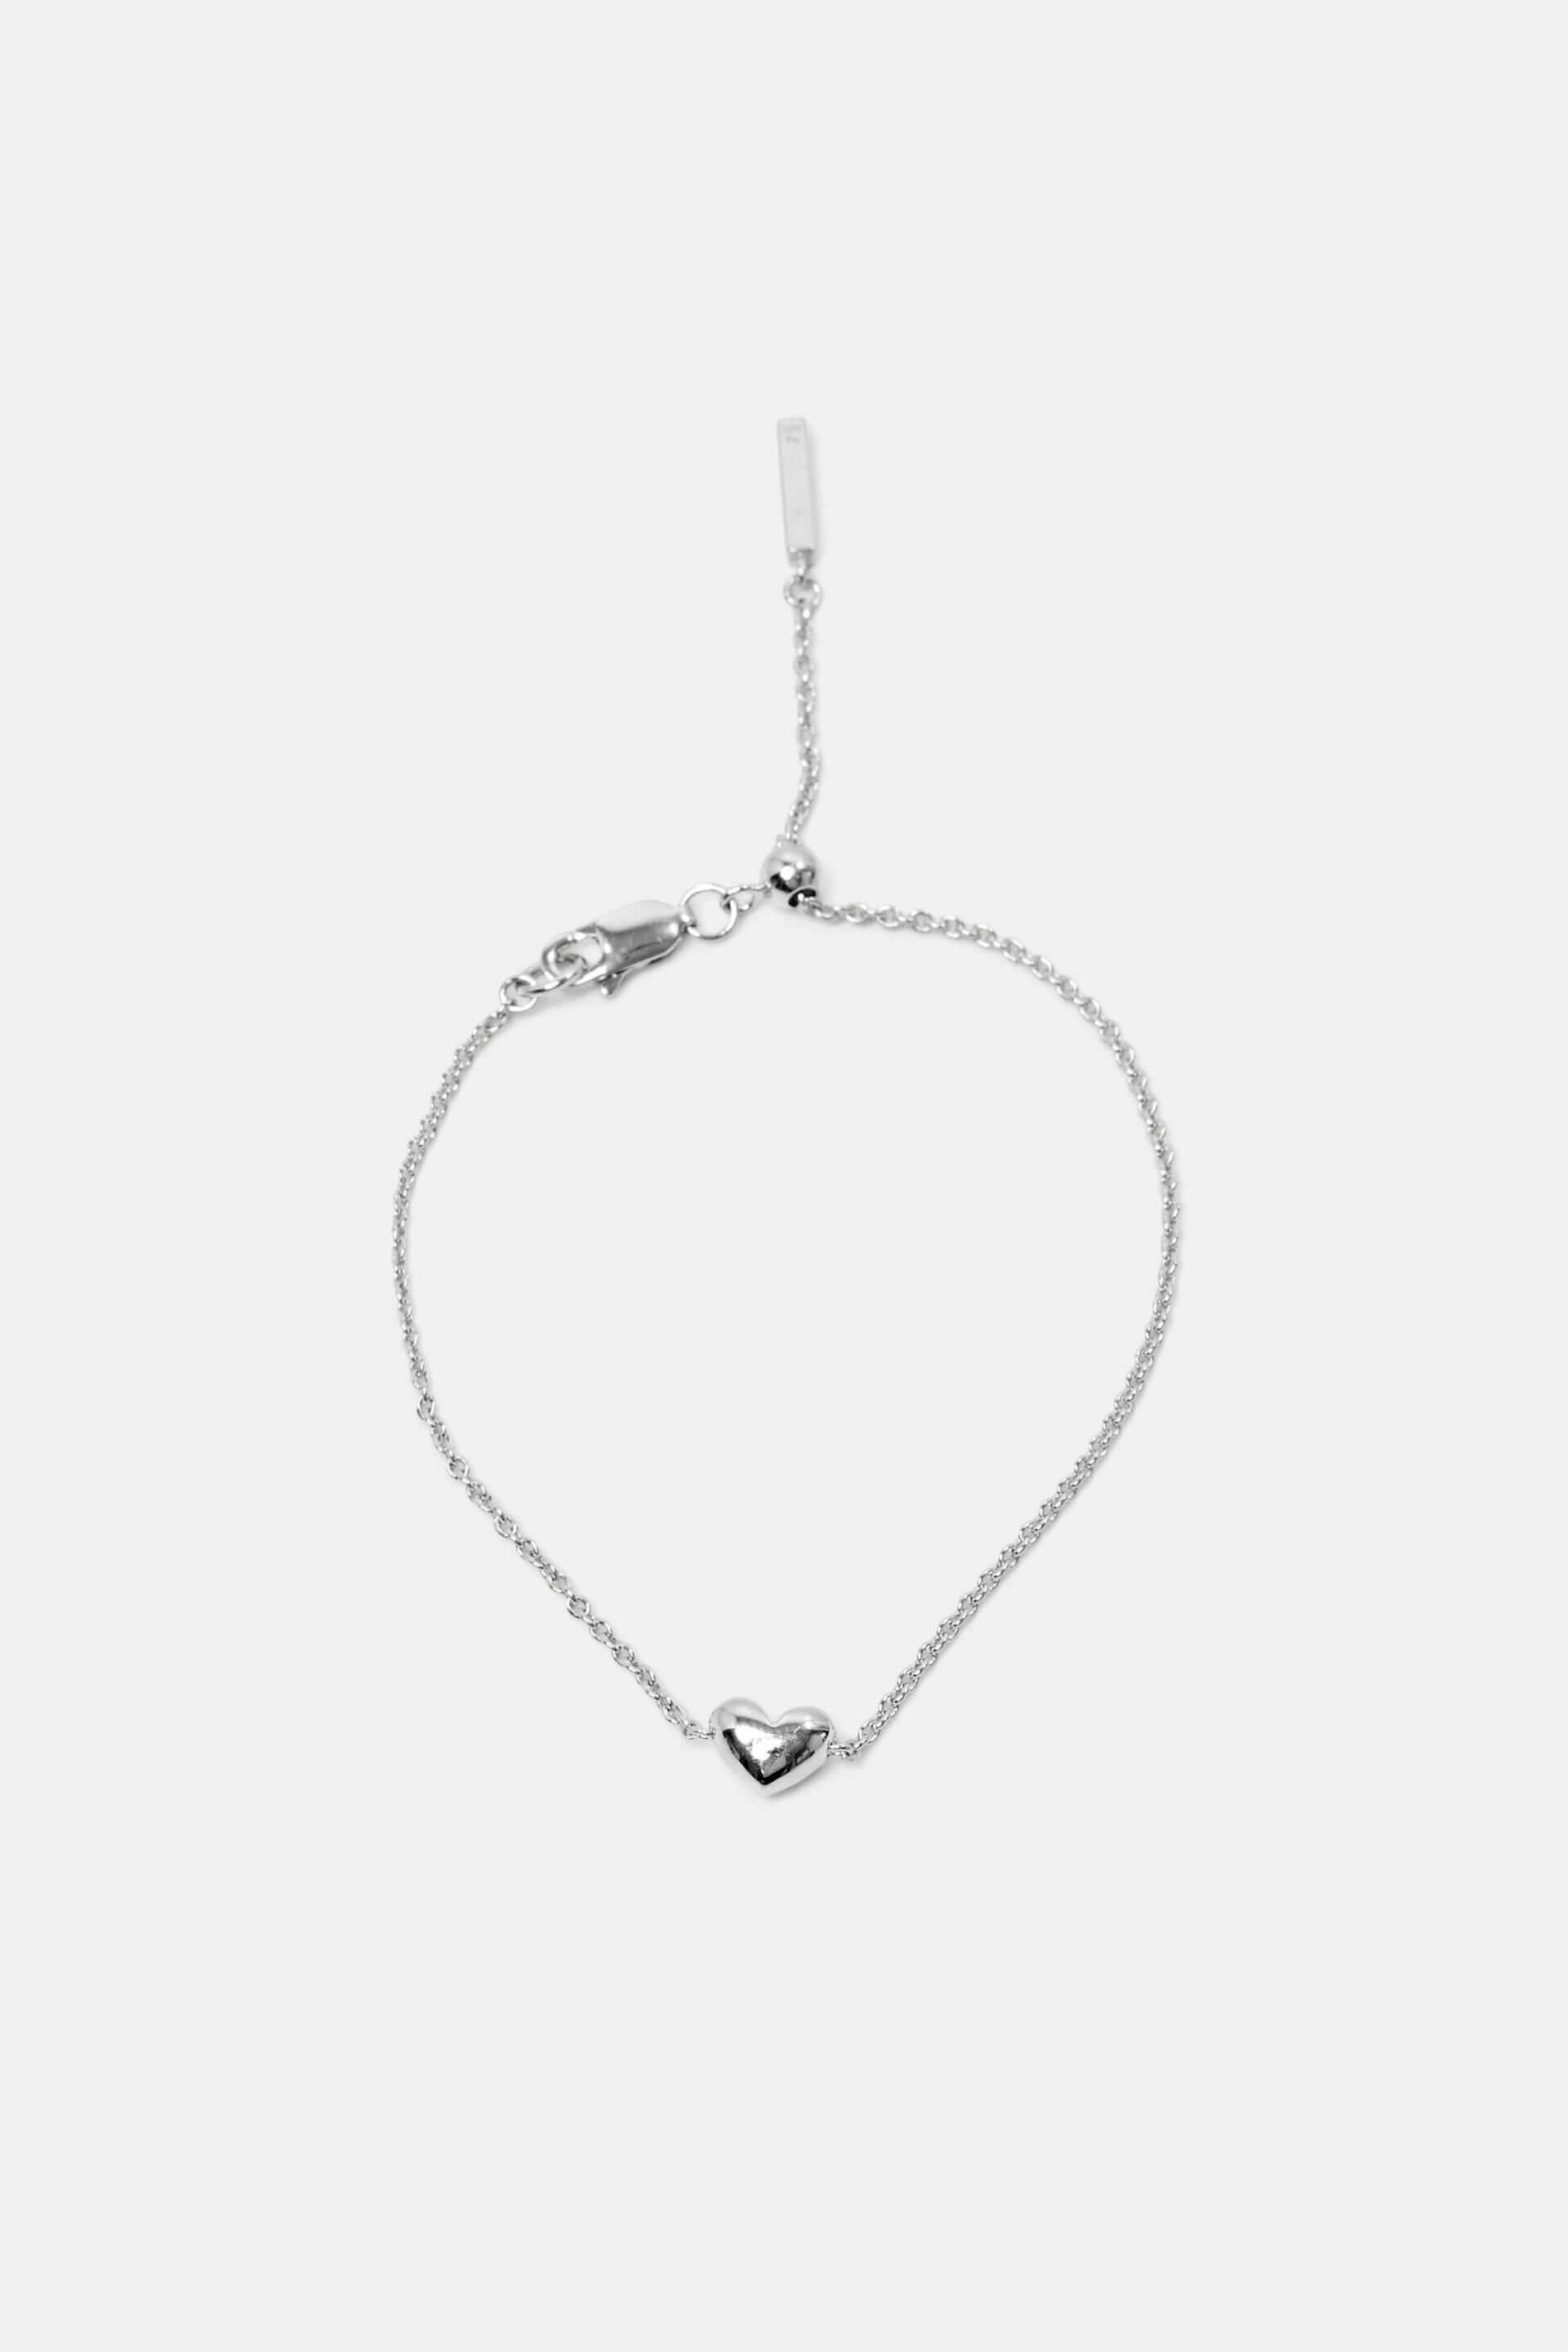 Nilu's Collection Sterling Silver Double Heart Charm Bracelet, White a